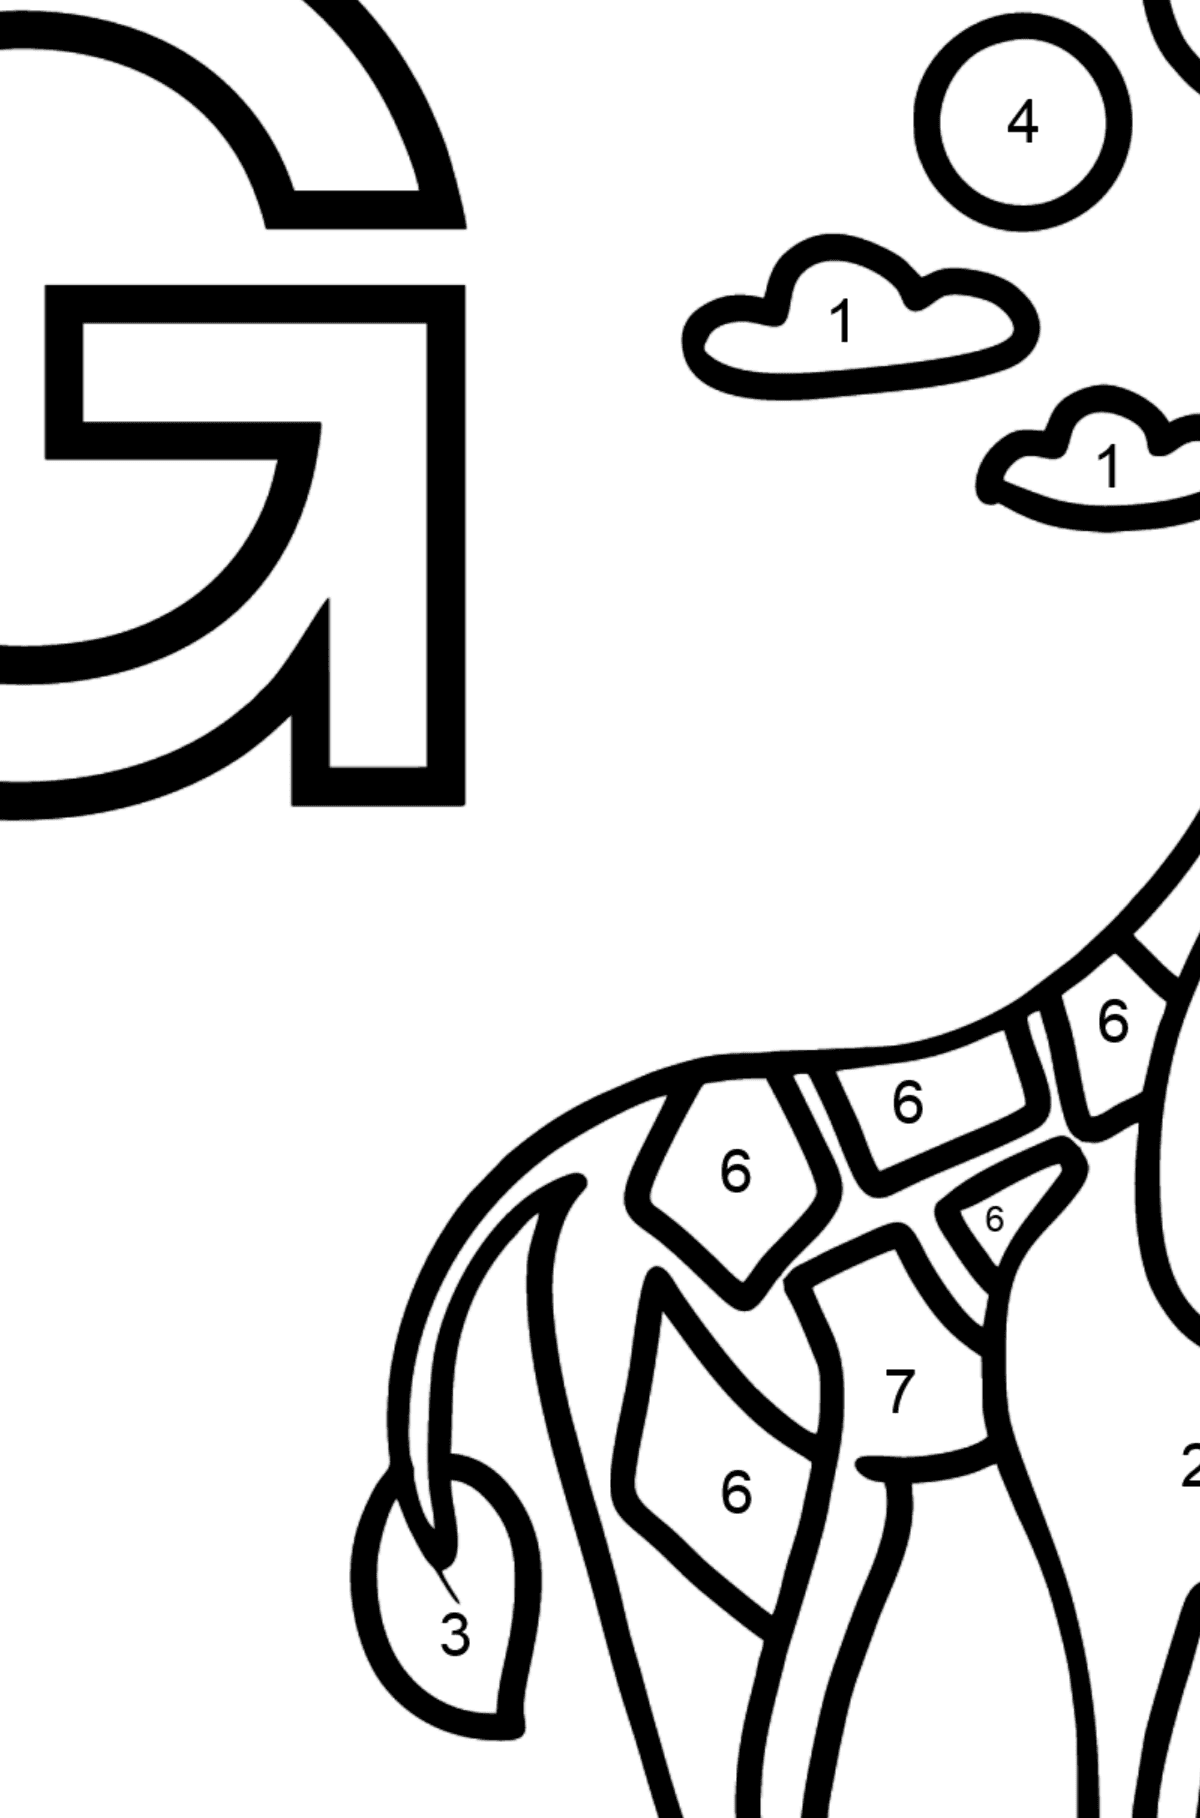 Portuguese Letter G coloring pages - GIRAFA - Coloring by Numbers for Kids